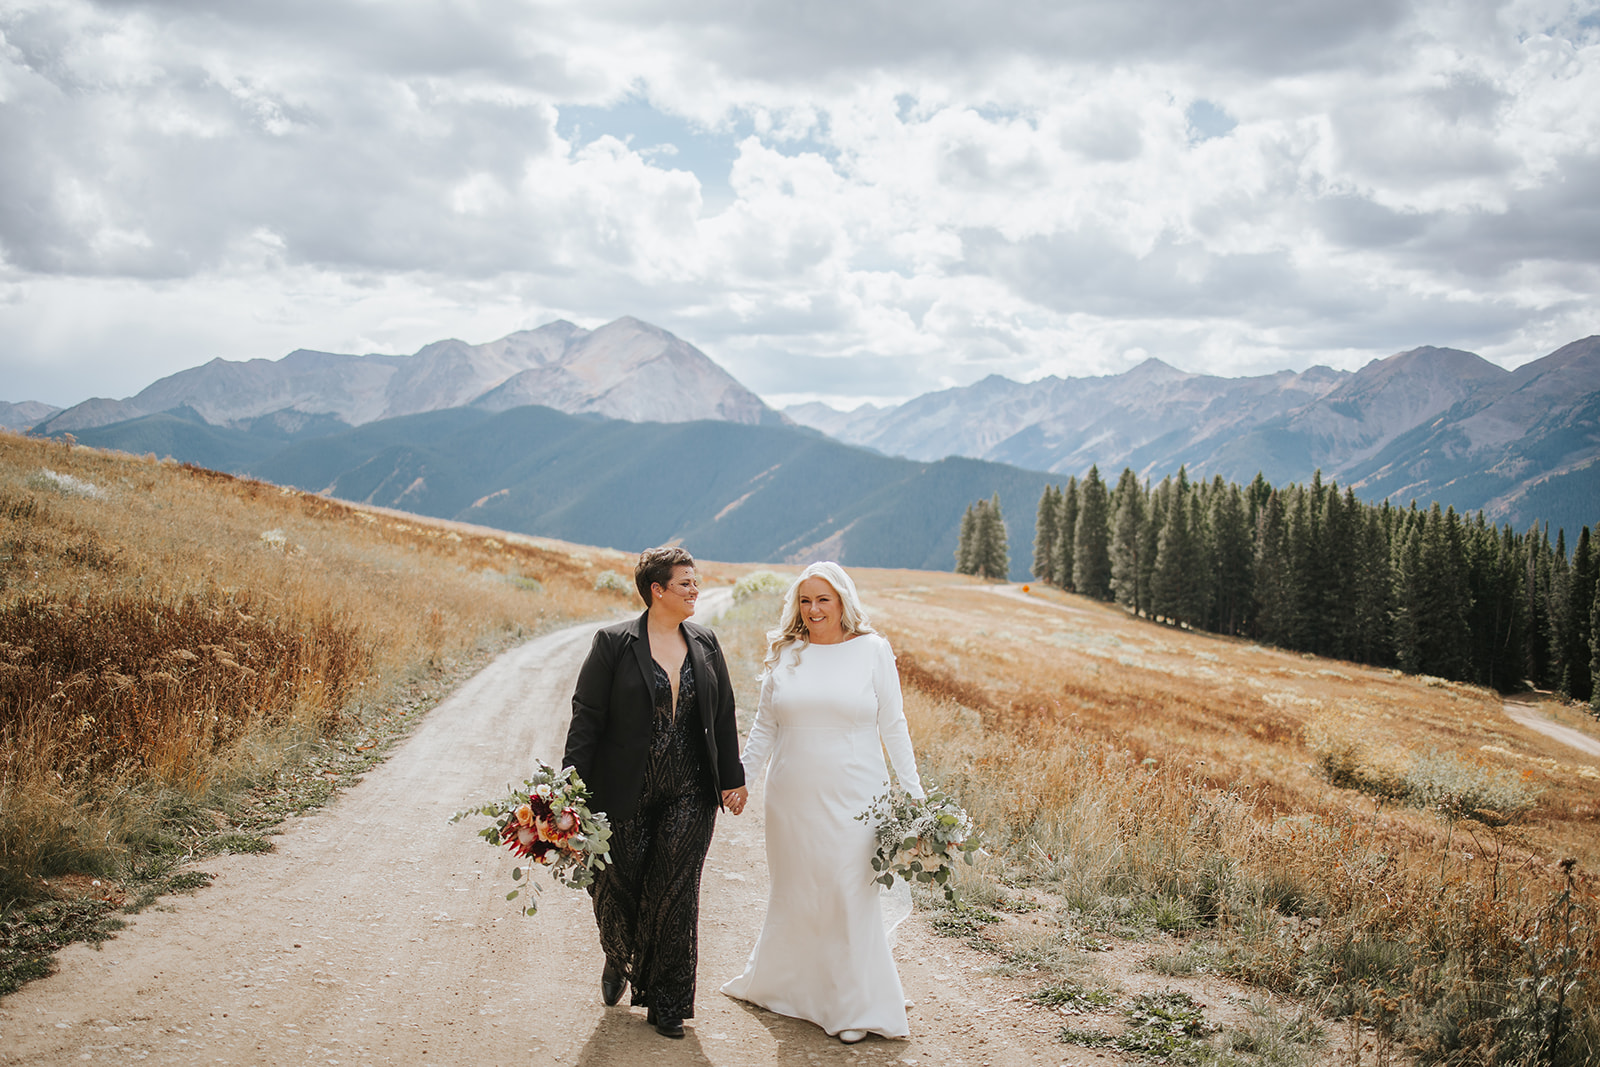 Mountain Elopement With a Rock n’ Roll Twist – The Pretty Pear Bride